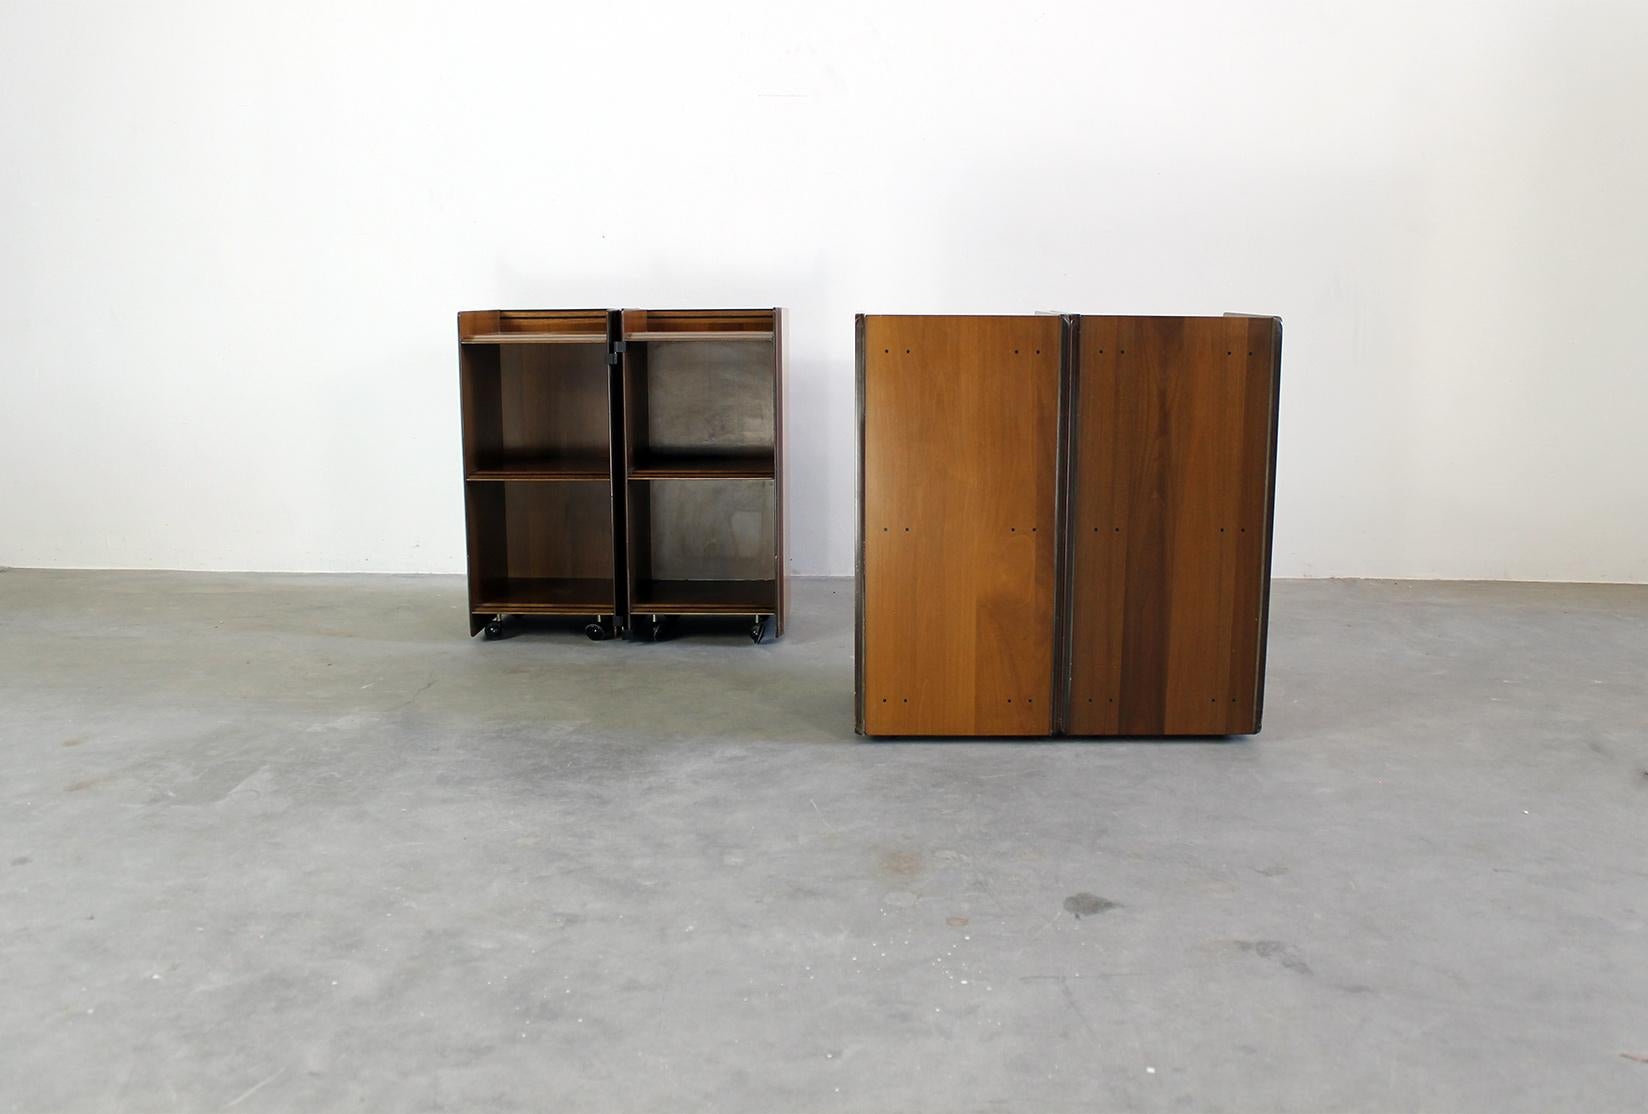 Tobia & Afra Scarpa Bedroom Set Artona with Bed and Nightstands by Maxalto 1970s For Sale 10